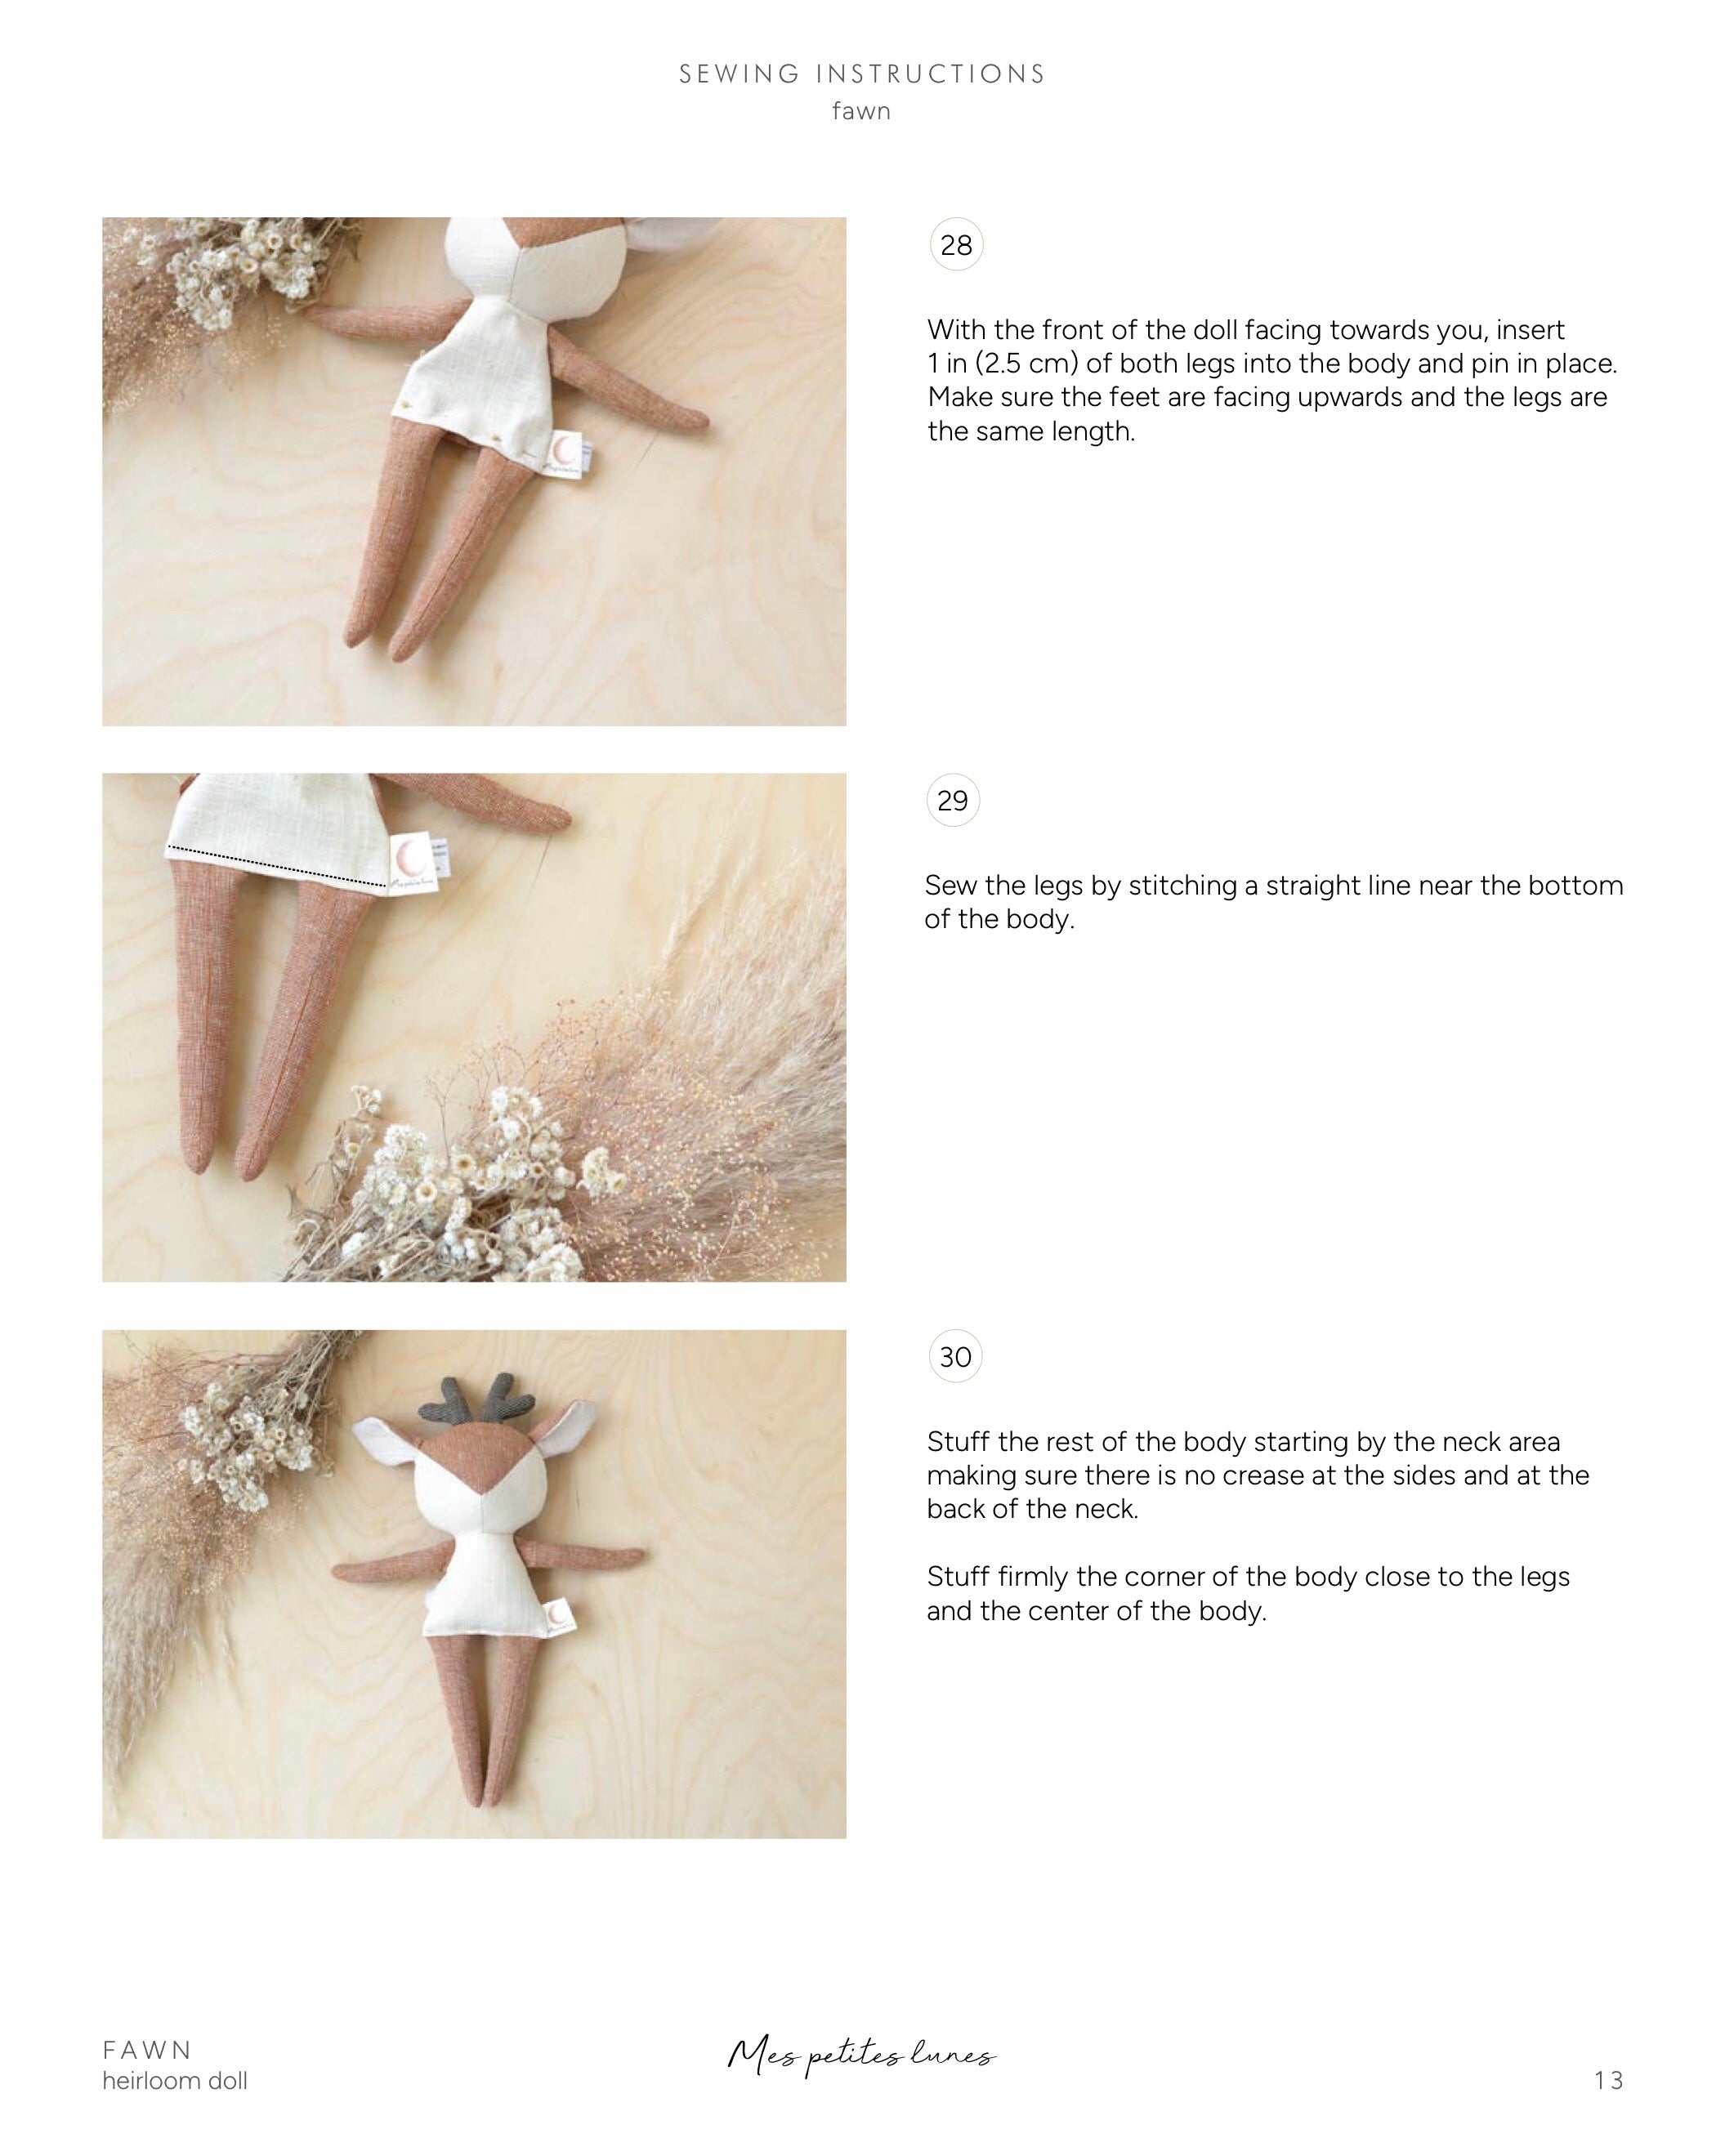 Sewing Pattern - Fawn doll